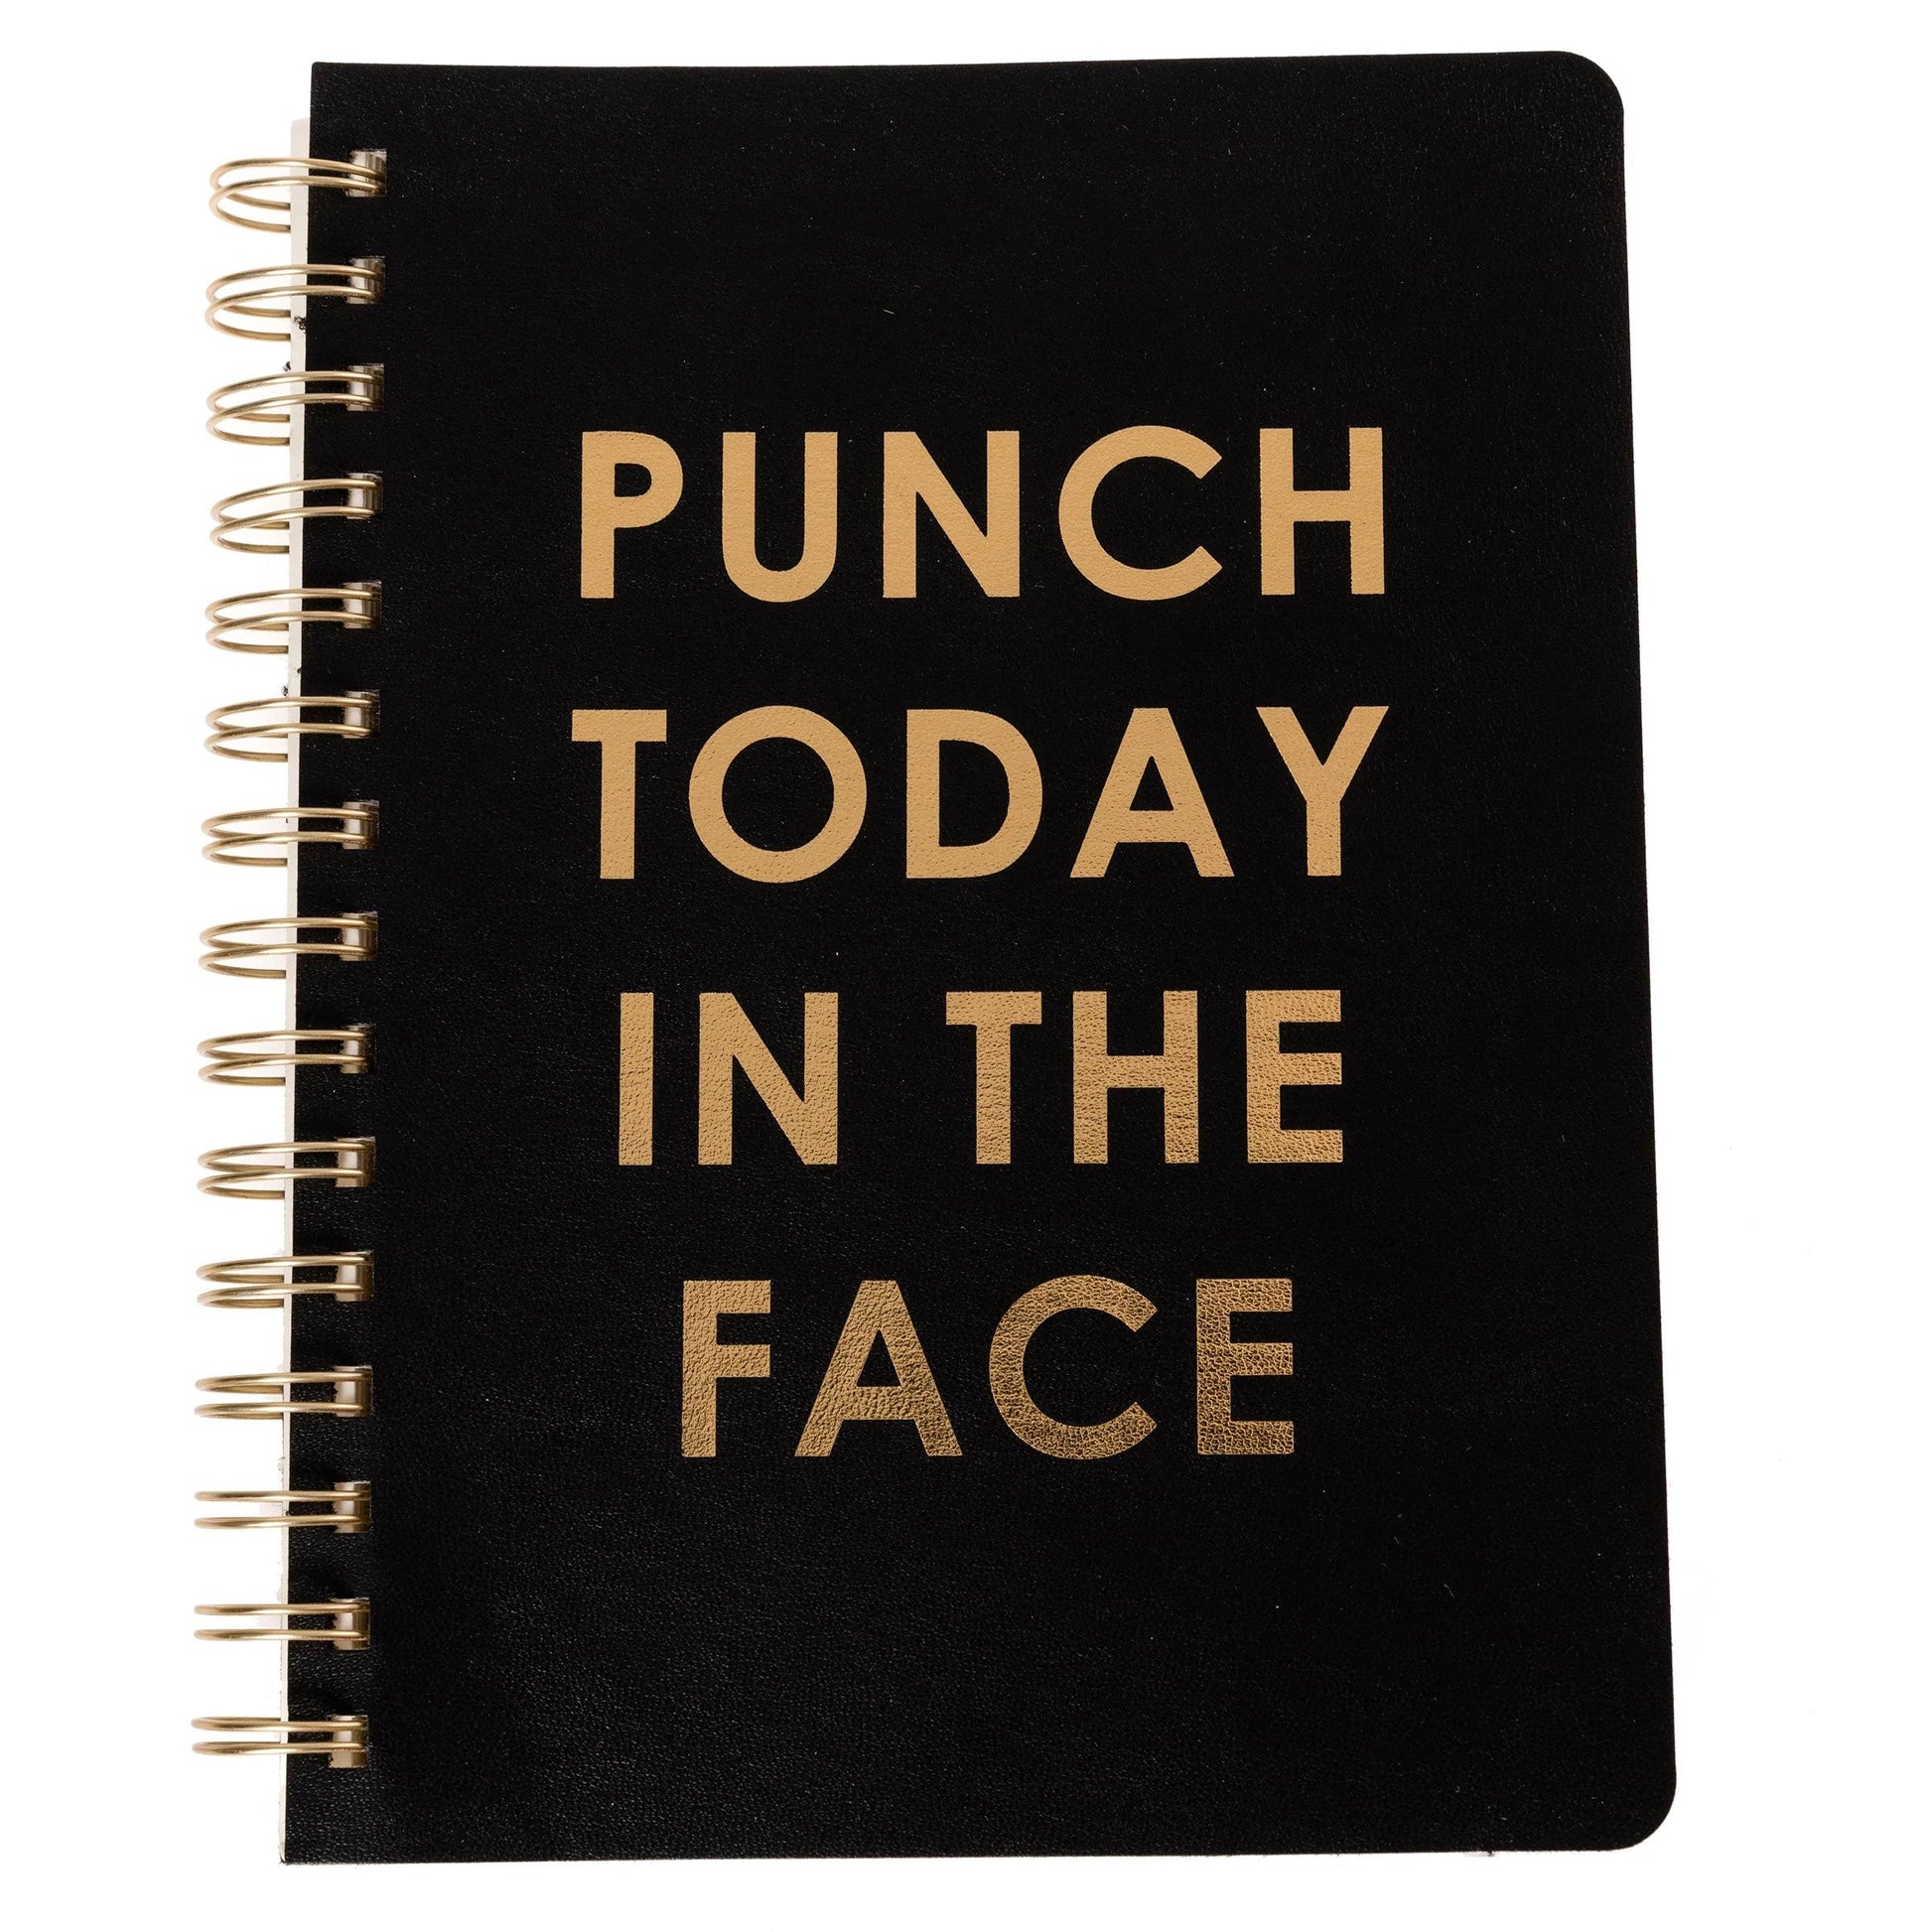 Punch Today In The Face Spiral Vegan Leather Journal | 192 Lined Pages Notebook | 6" x 8"